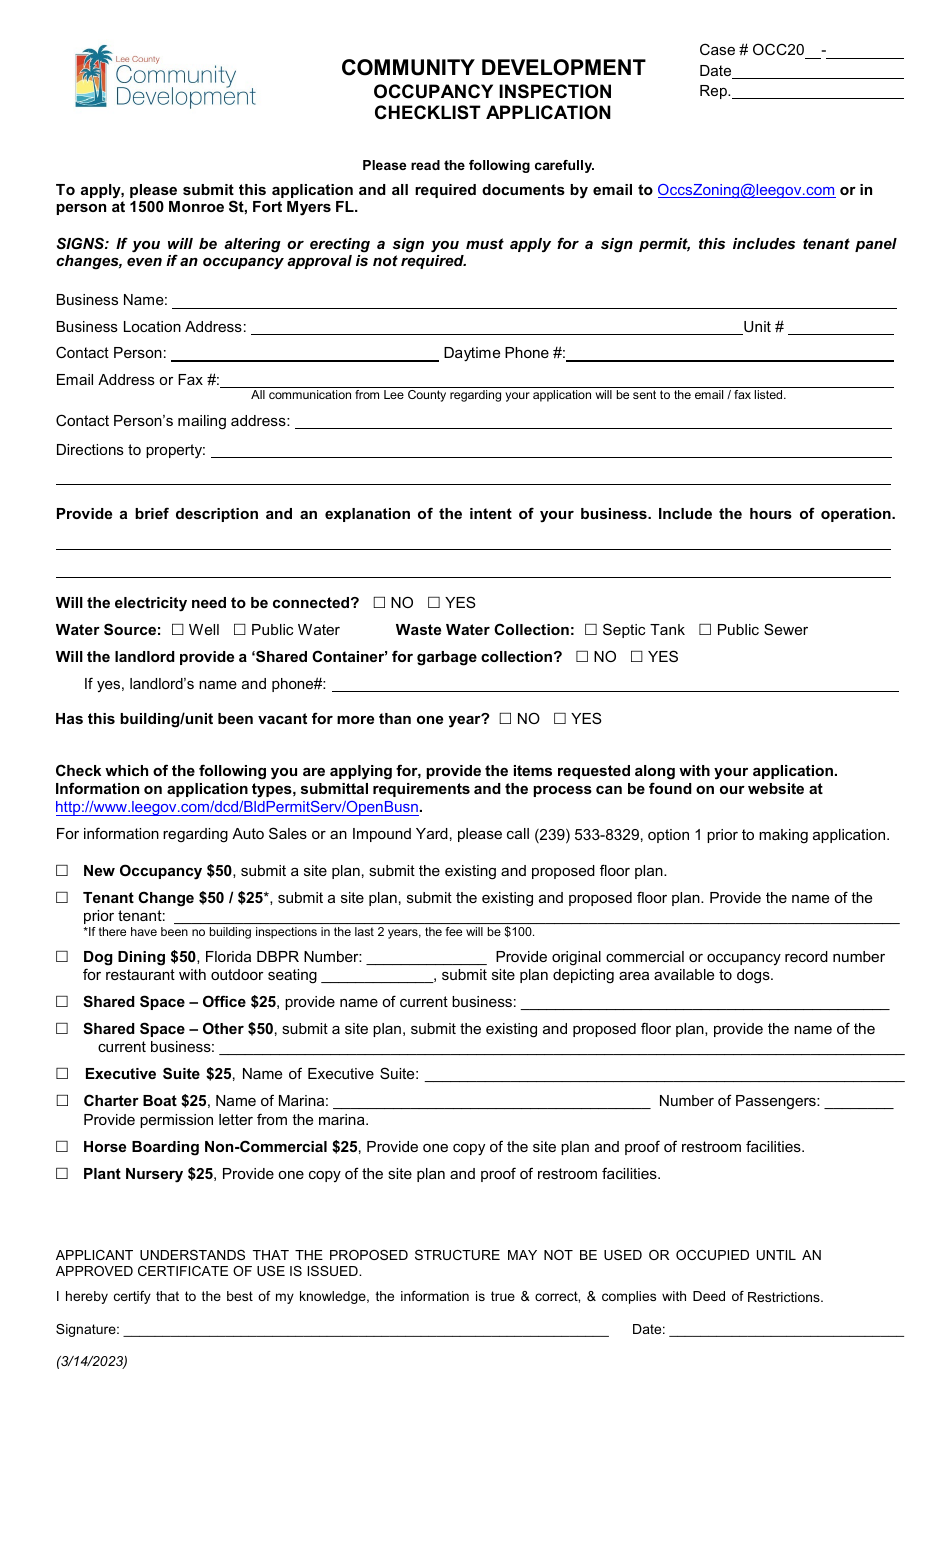 Occupancy Inspection Checklist Application - Lee County, Florida, Page 1